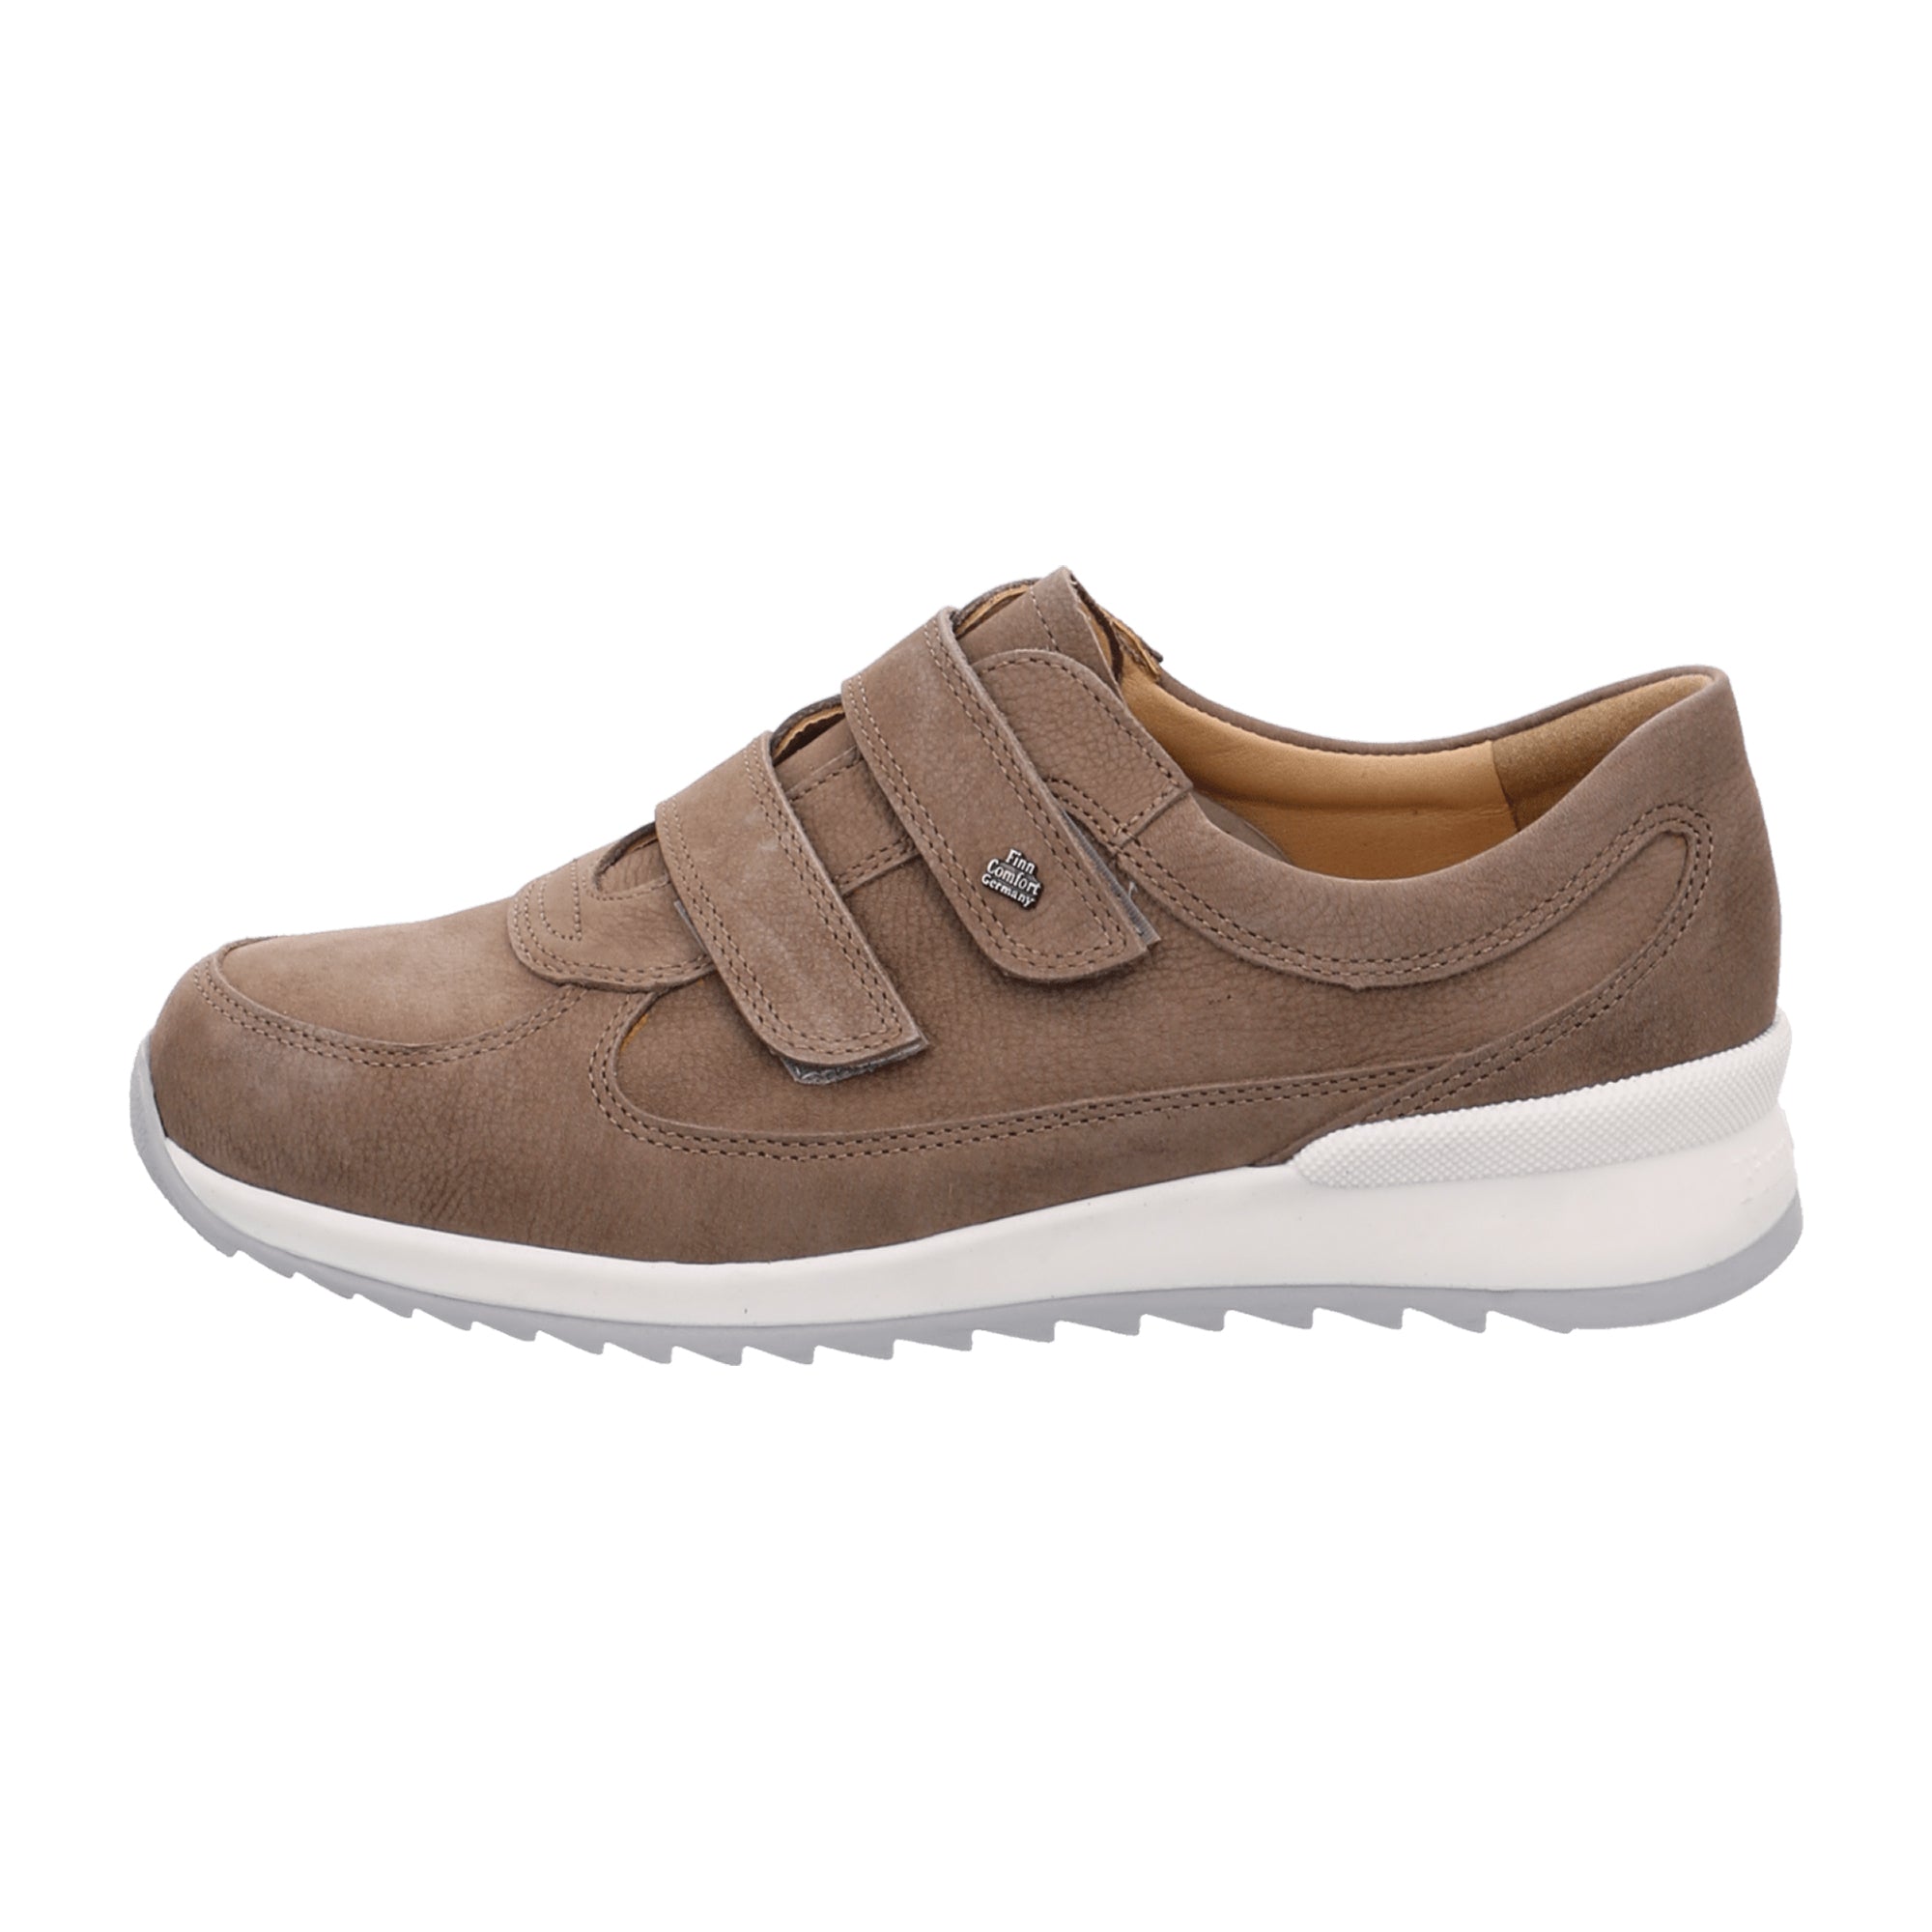 Finn Comfort Brenzone Women's Comfortable Leather Shoes in Brown